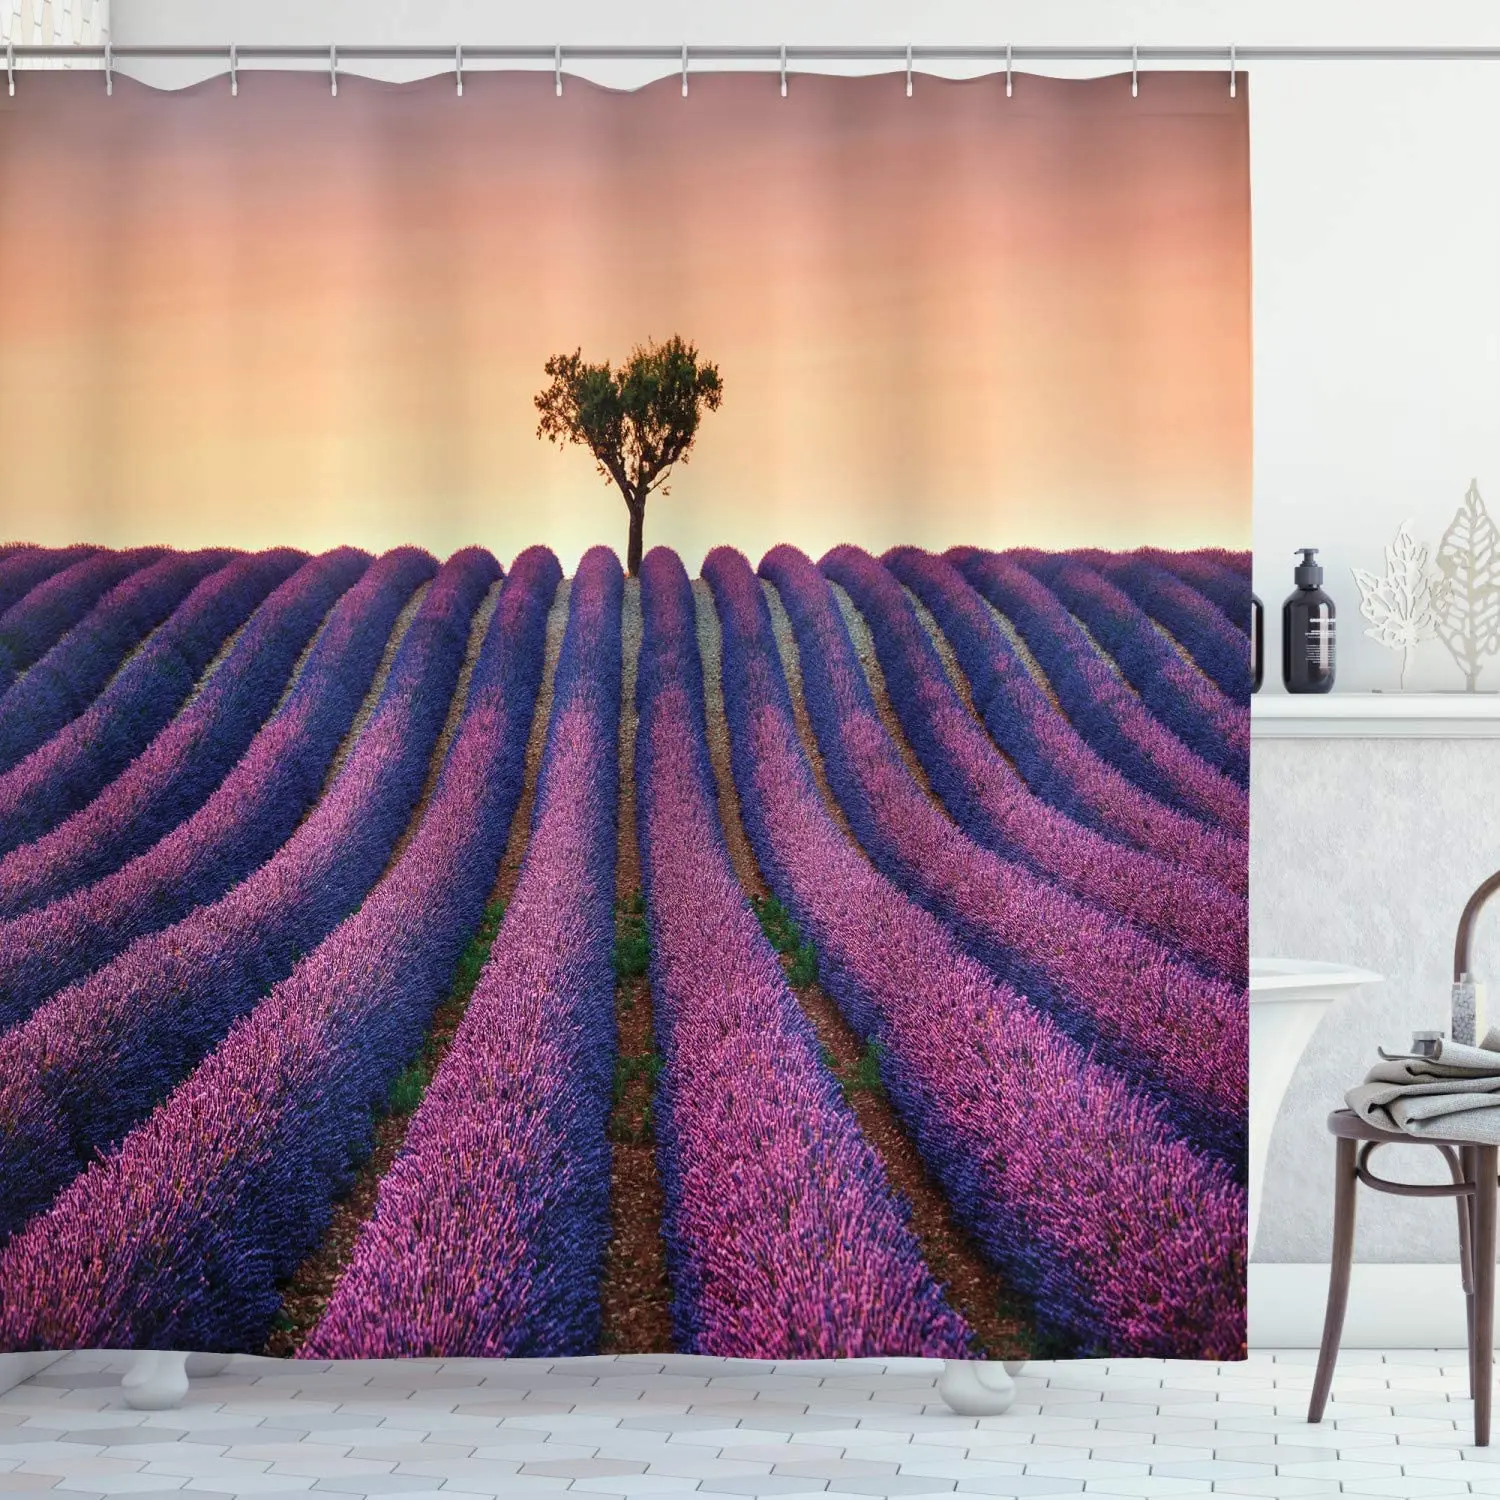 

Farm House Decor Shower Curtain Set Lavender Flowers Blooming Field and A Tree Uphill on Sunset Valensole France Bathroom